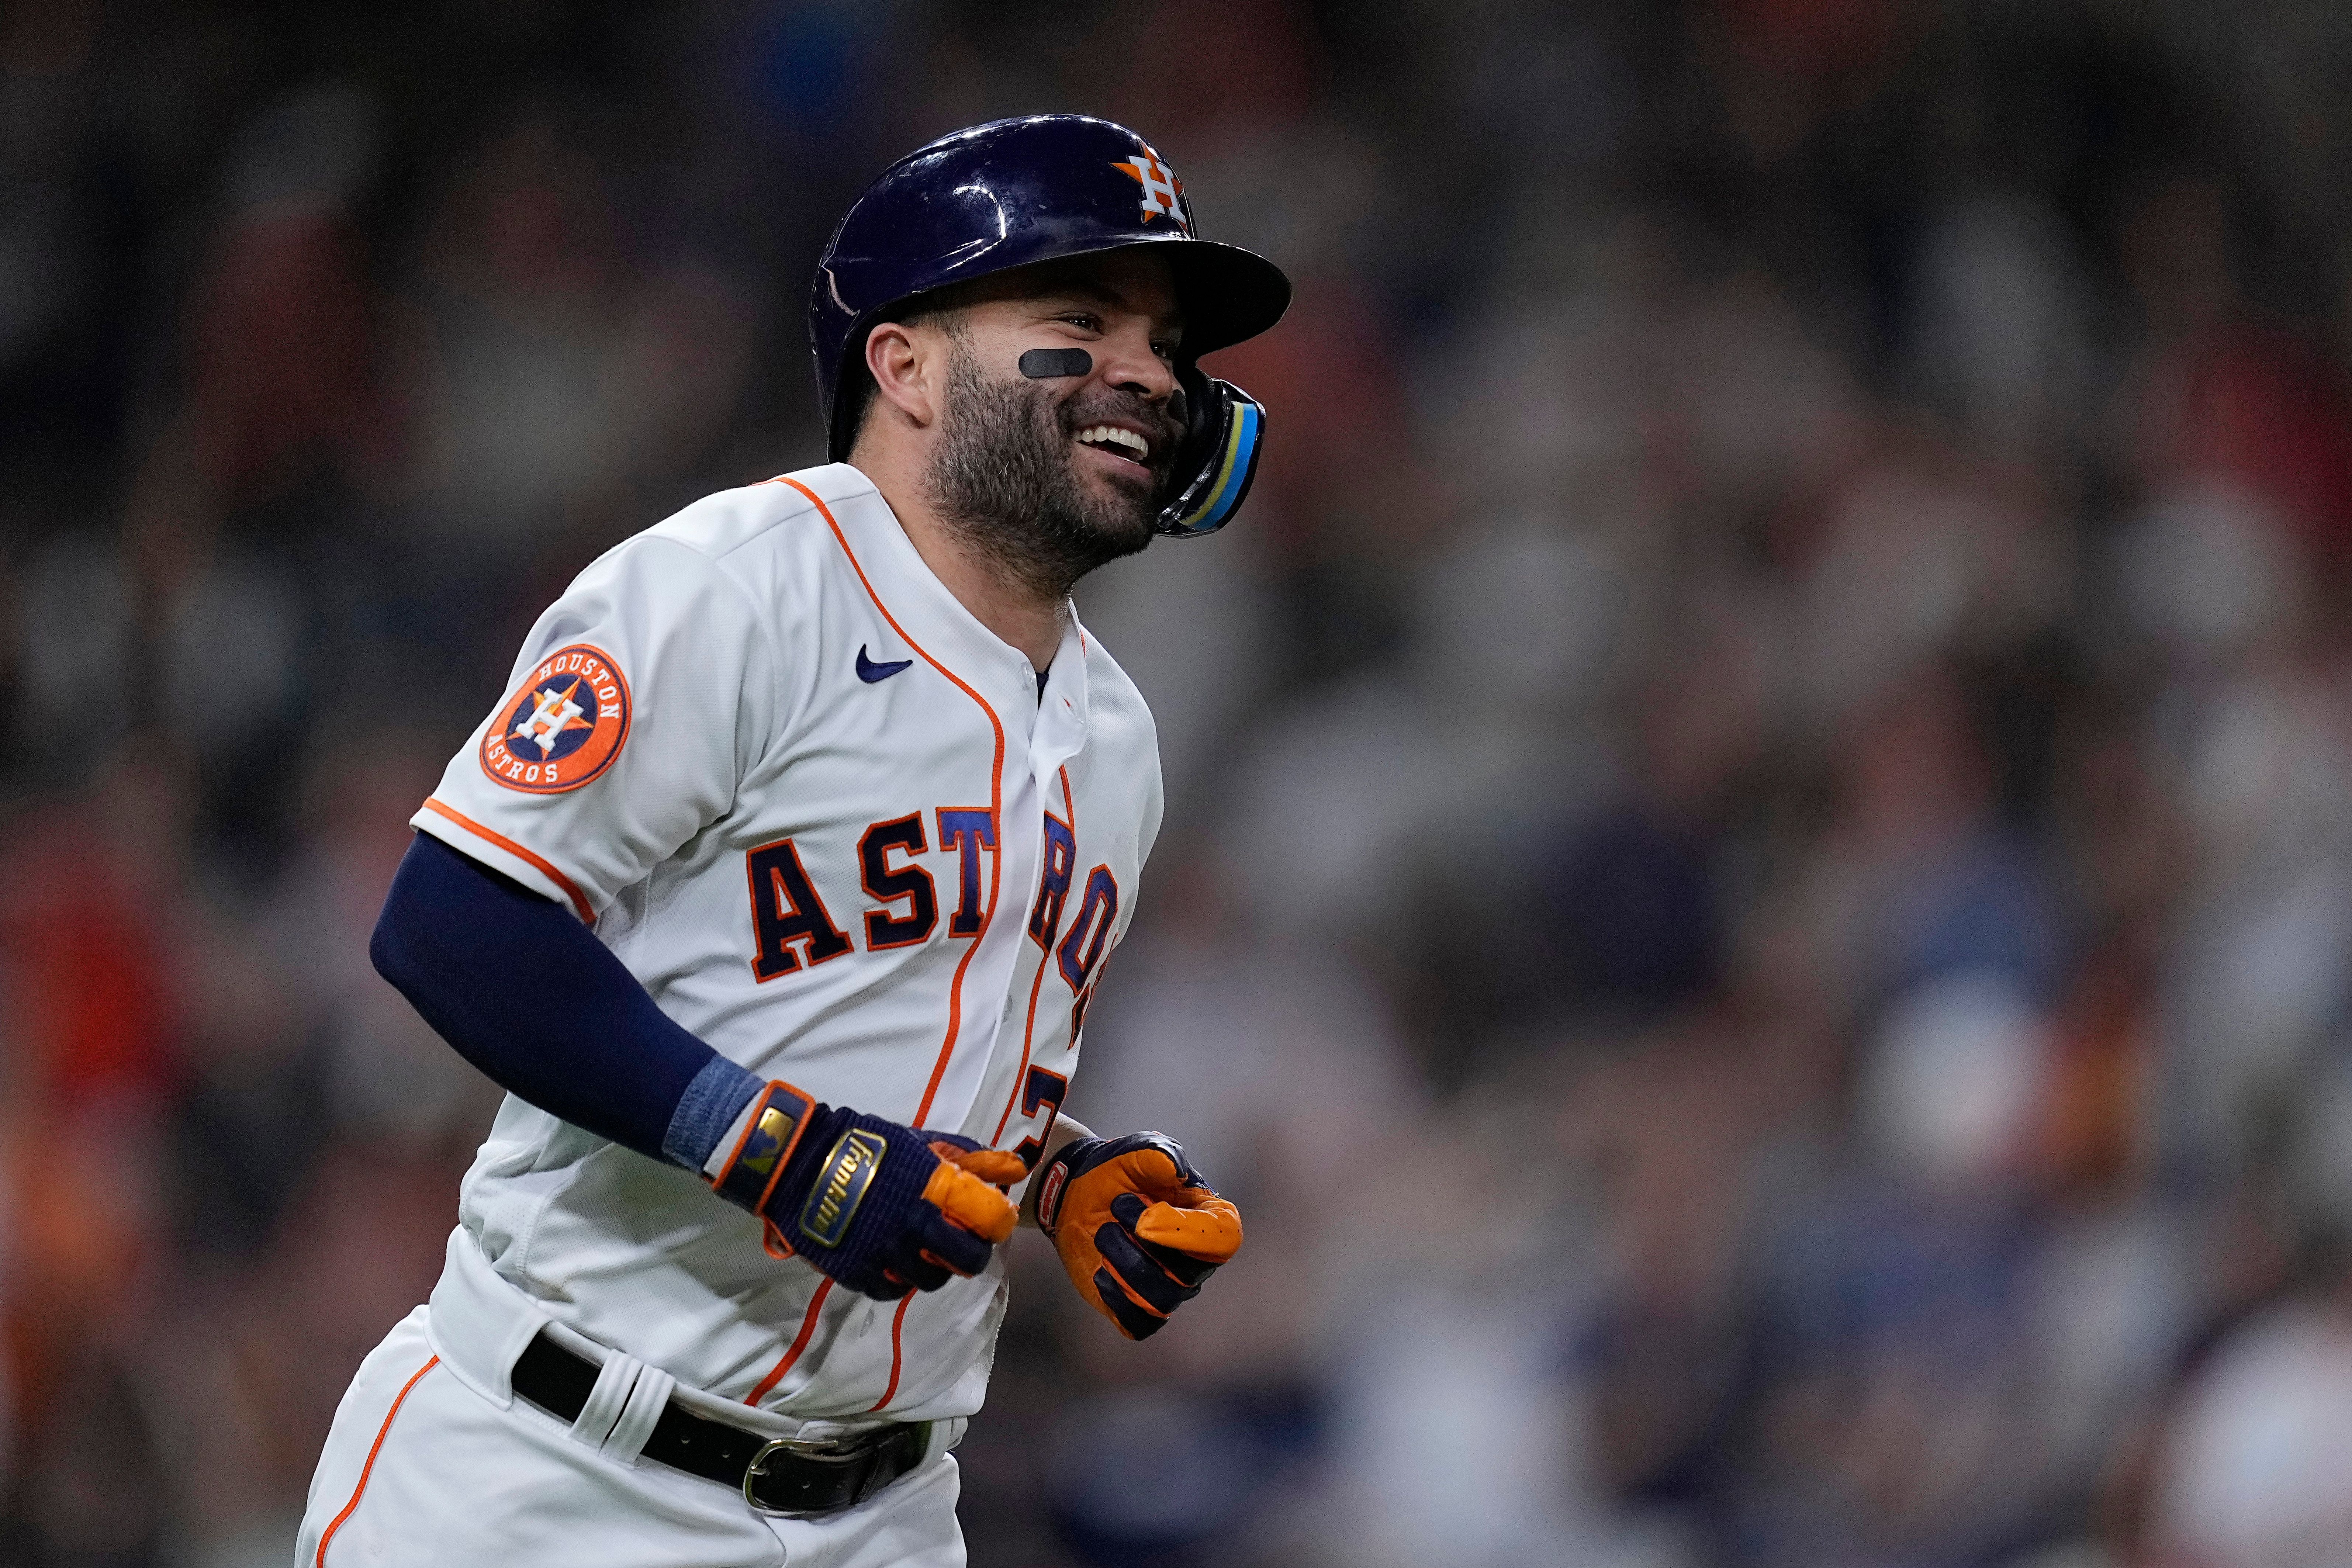 If the Astros have been overlooked this season, the return of Alvarez and Altuve could change that The Seattle Times